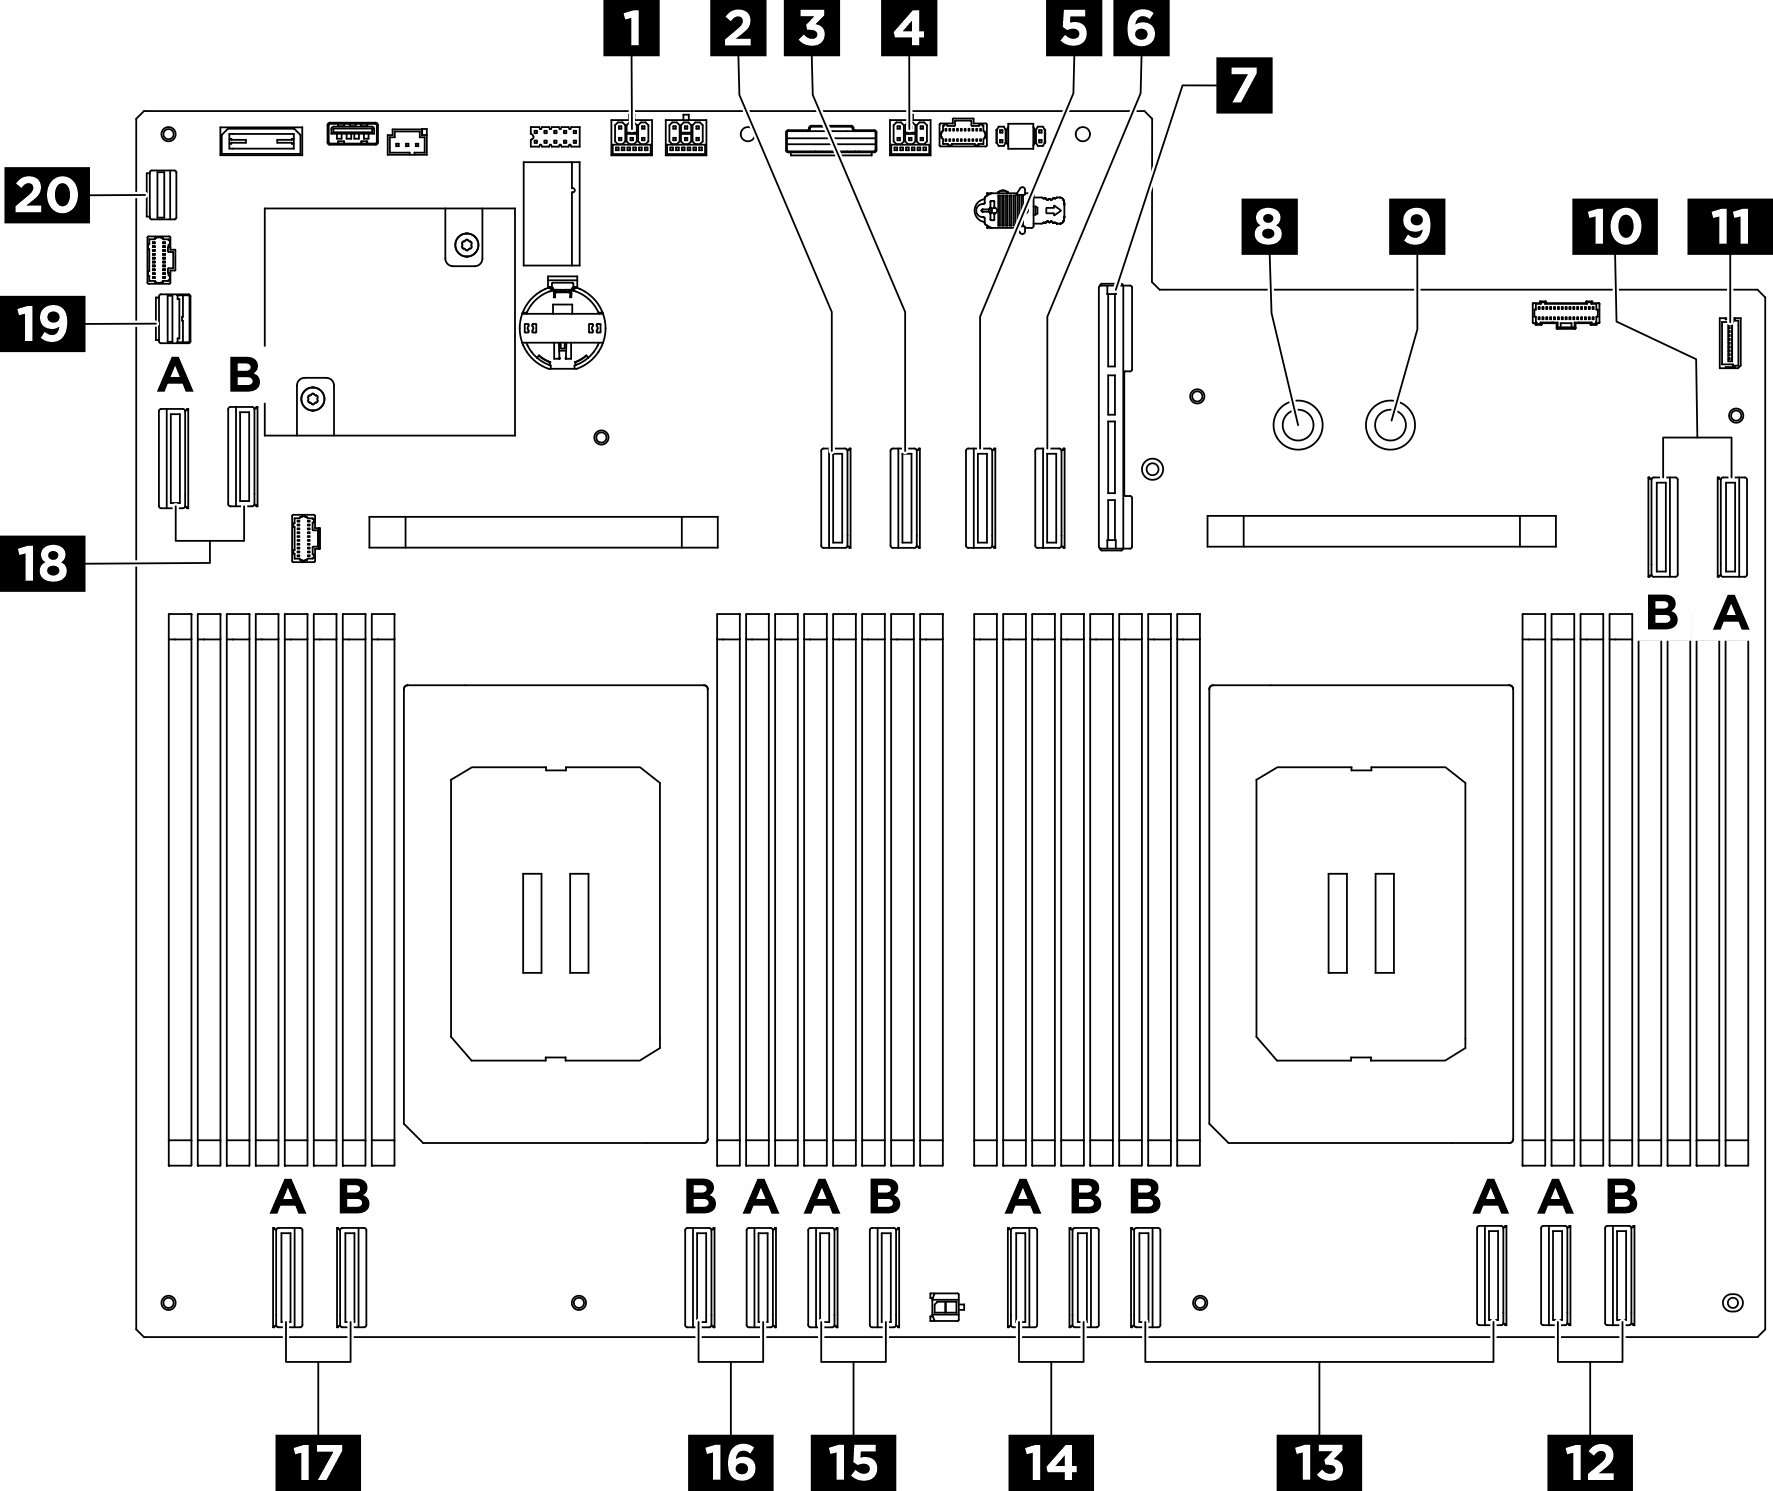 System board connectors for cable routing